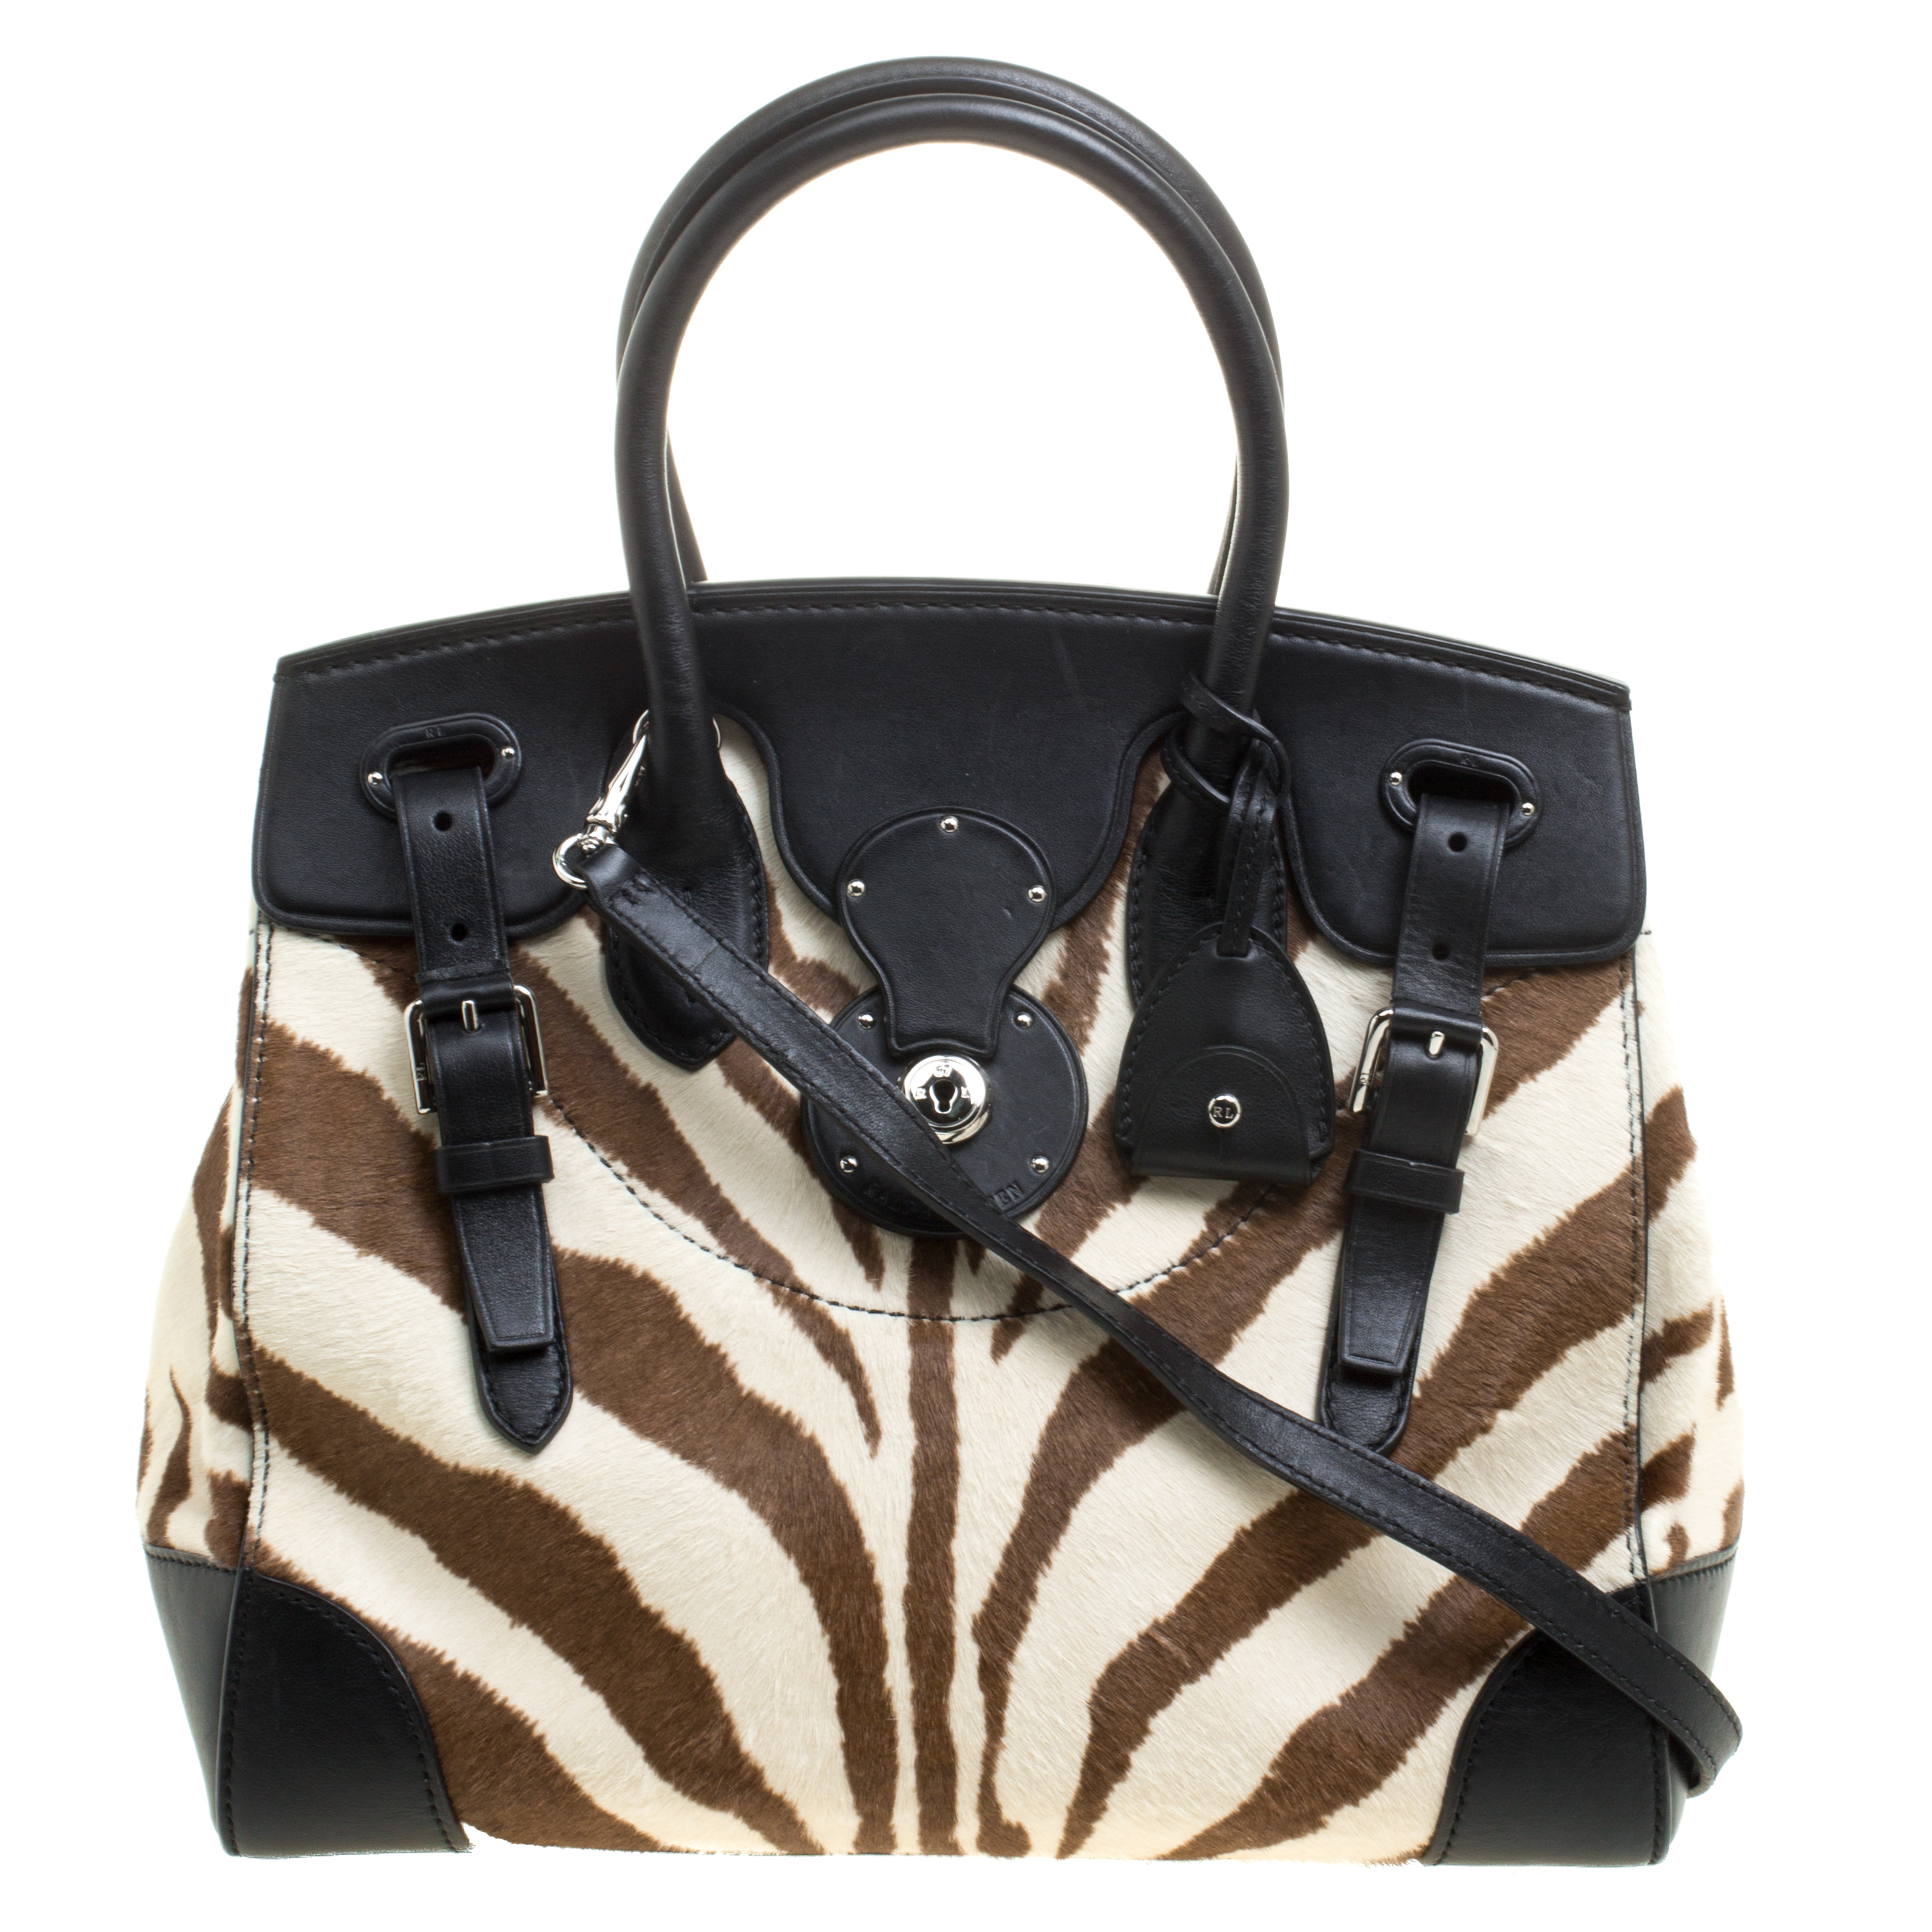 Ralph Lauren Tri Color Calf Hair Soft Leather Ricky Tote